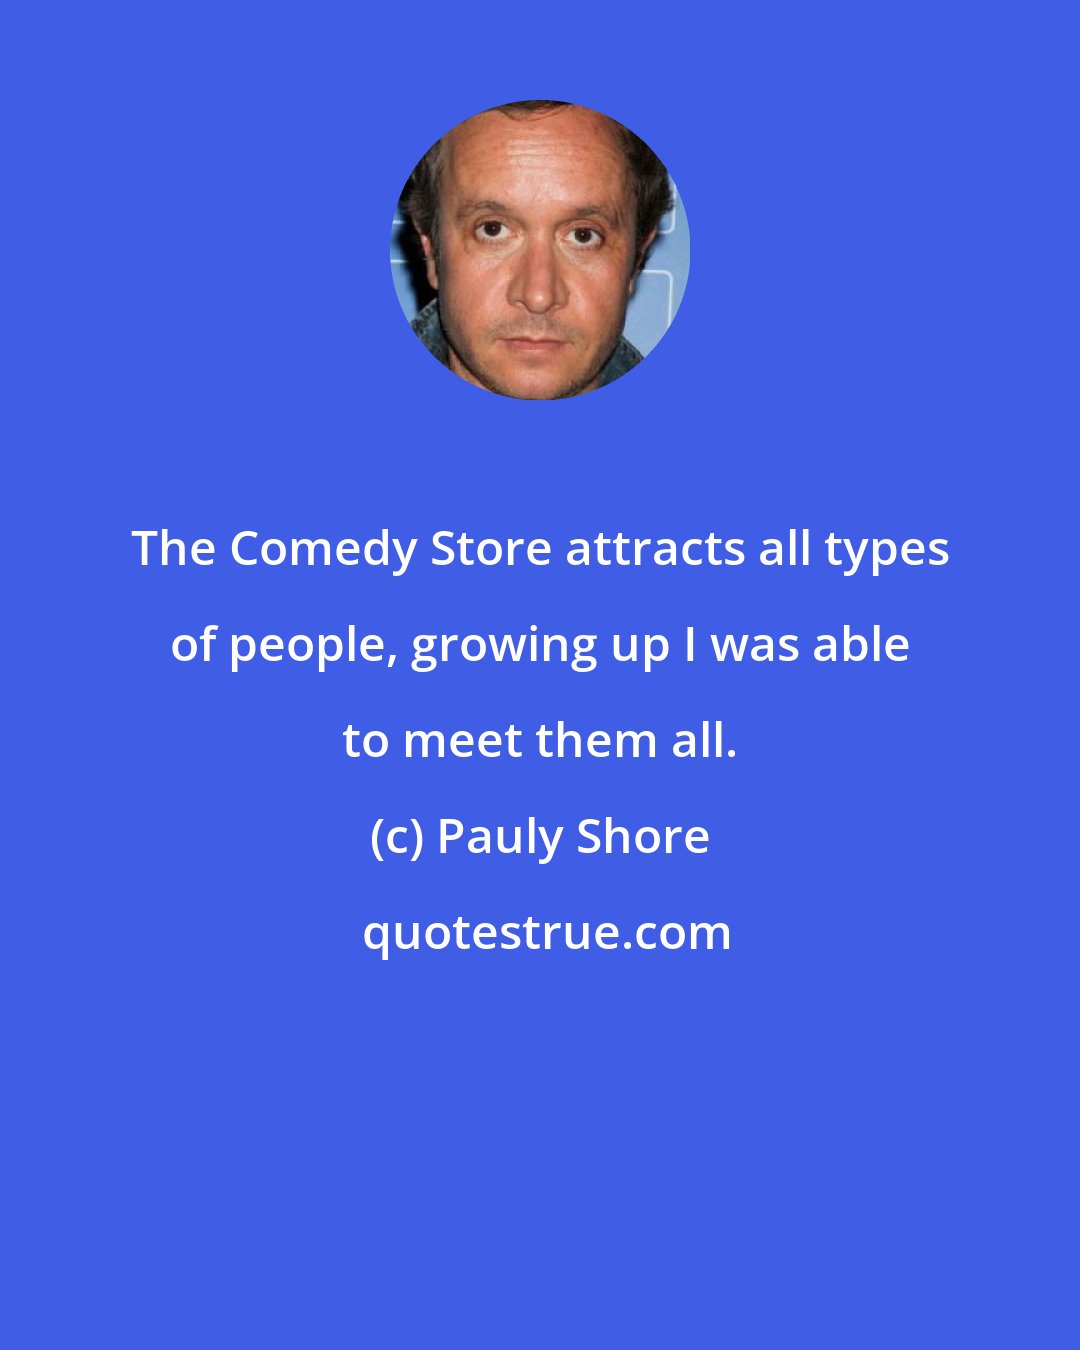 Pauly Shore: The Comedy Store attracts all types of people, growing up I was able to meet them all.